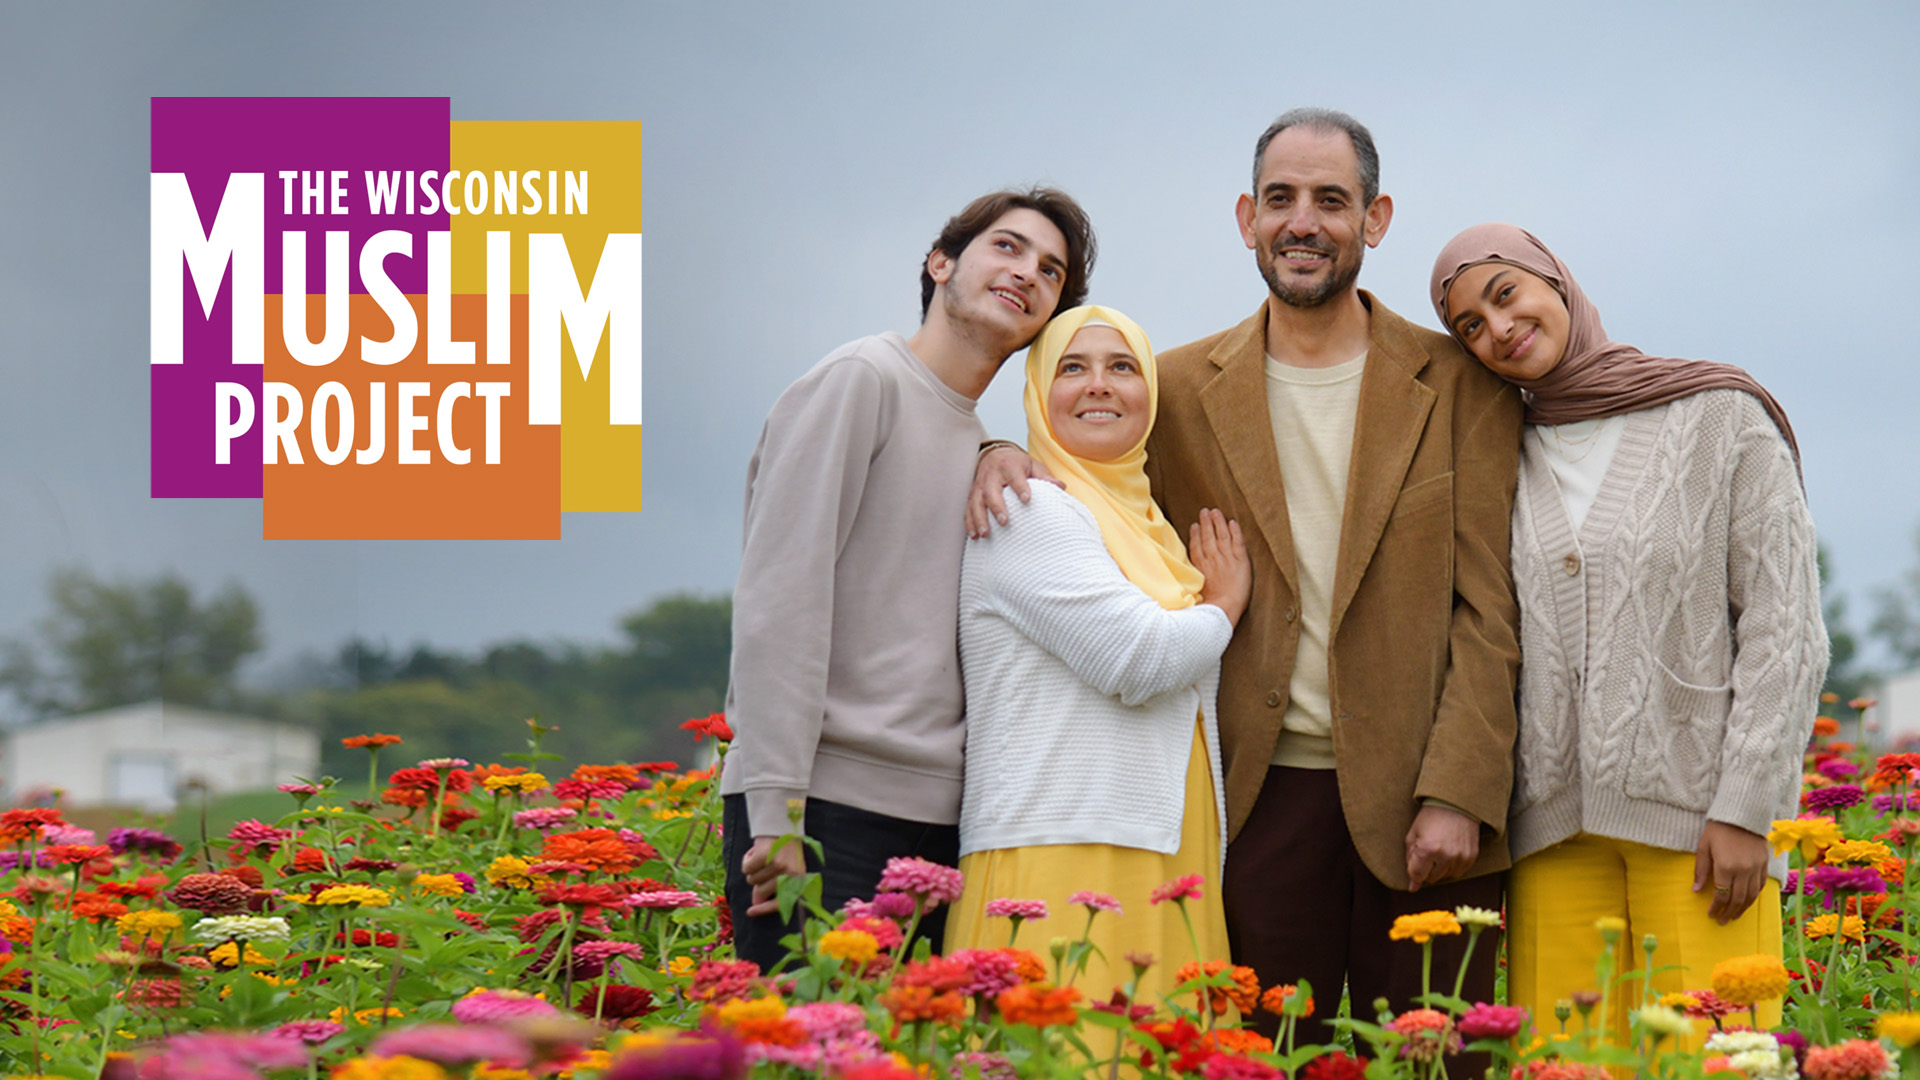 Two men and two women standing in a field of flowers. Text on image reads "The Wisconsin Muslim Project."